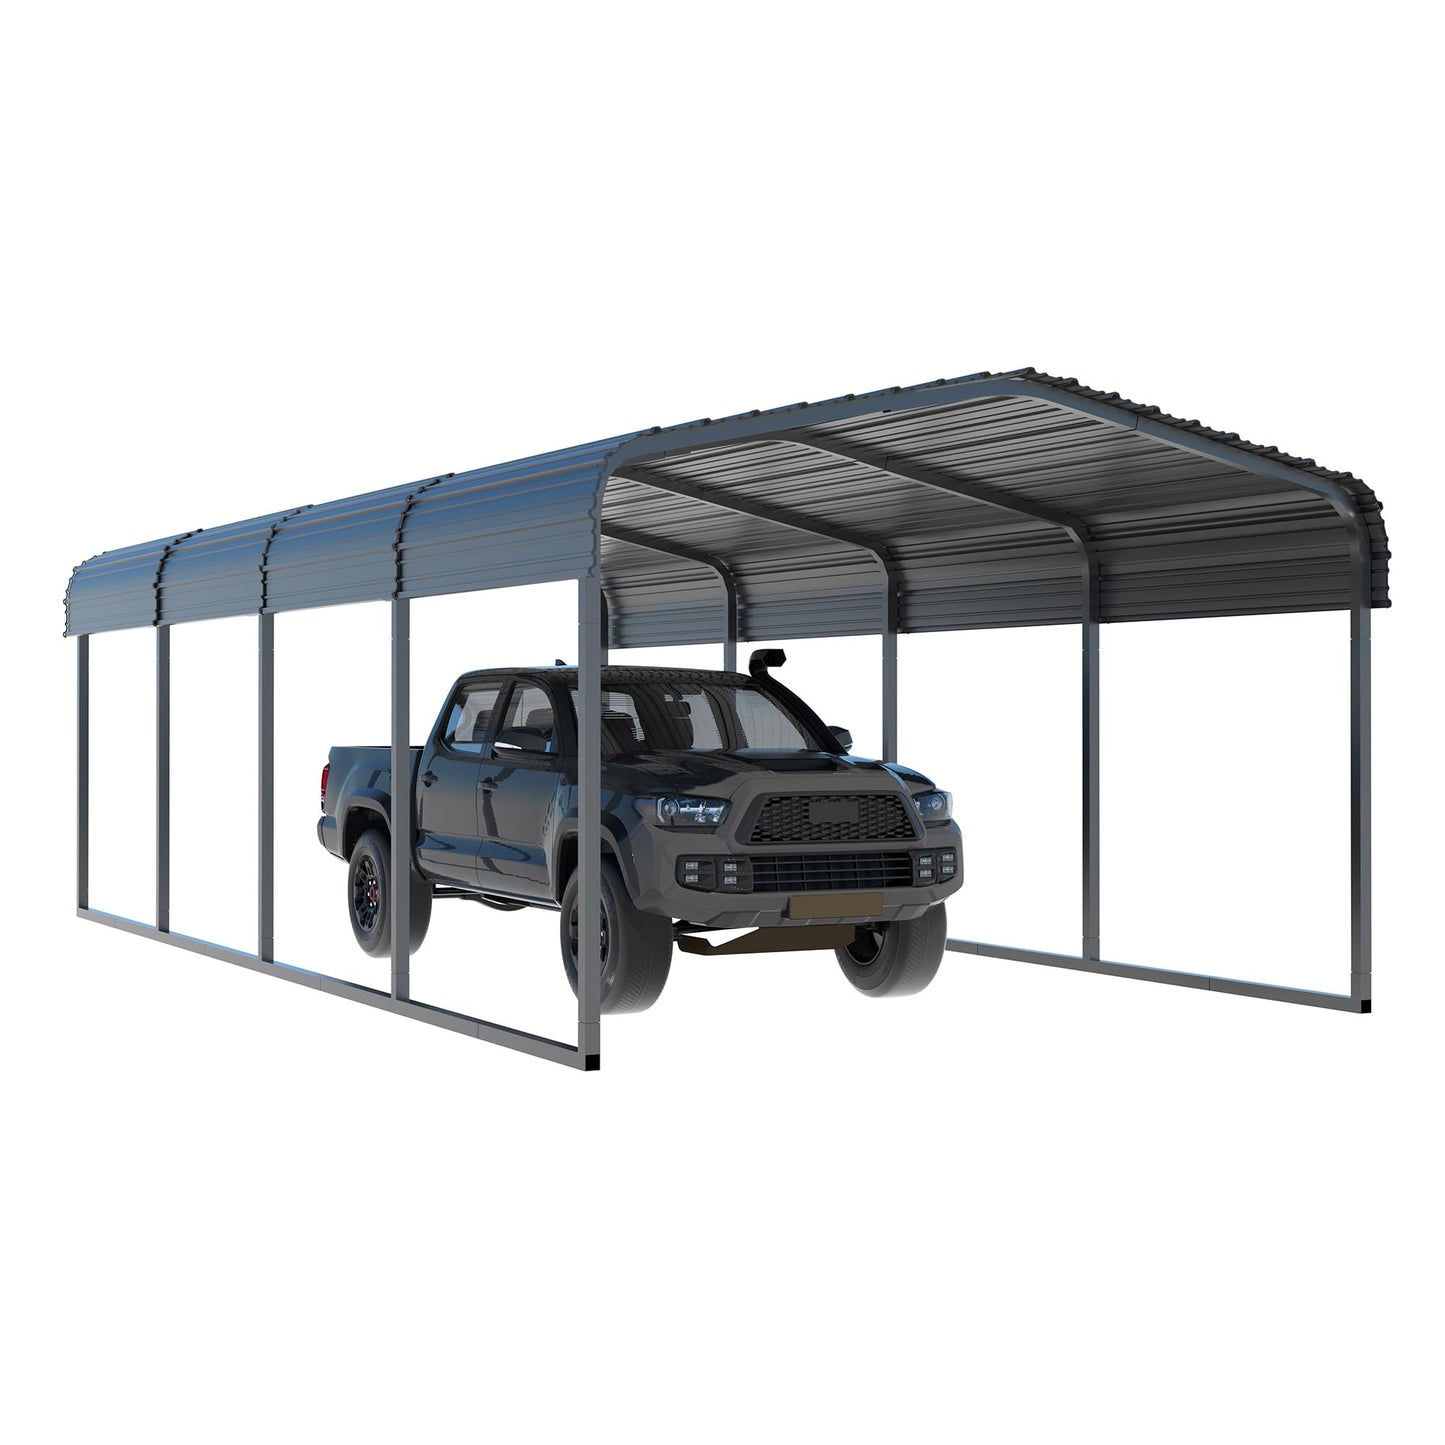 MUPATER Outdoor Carport, 12' x 20' Heavy Duty Canopy for Garage,Car Garage Shelter with Galvanized Metal Roof and Frame for Car, and Boat, Grey 12 x 20 FT